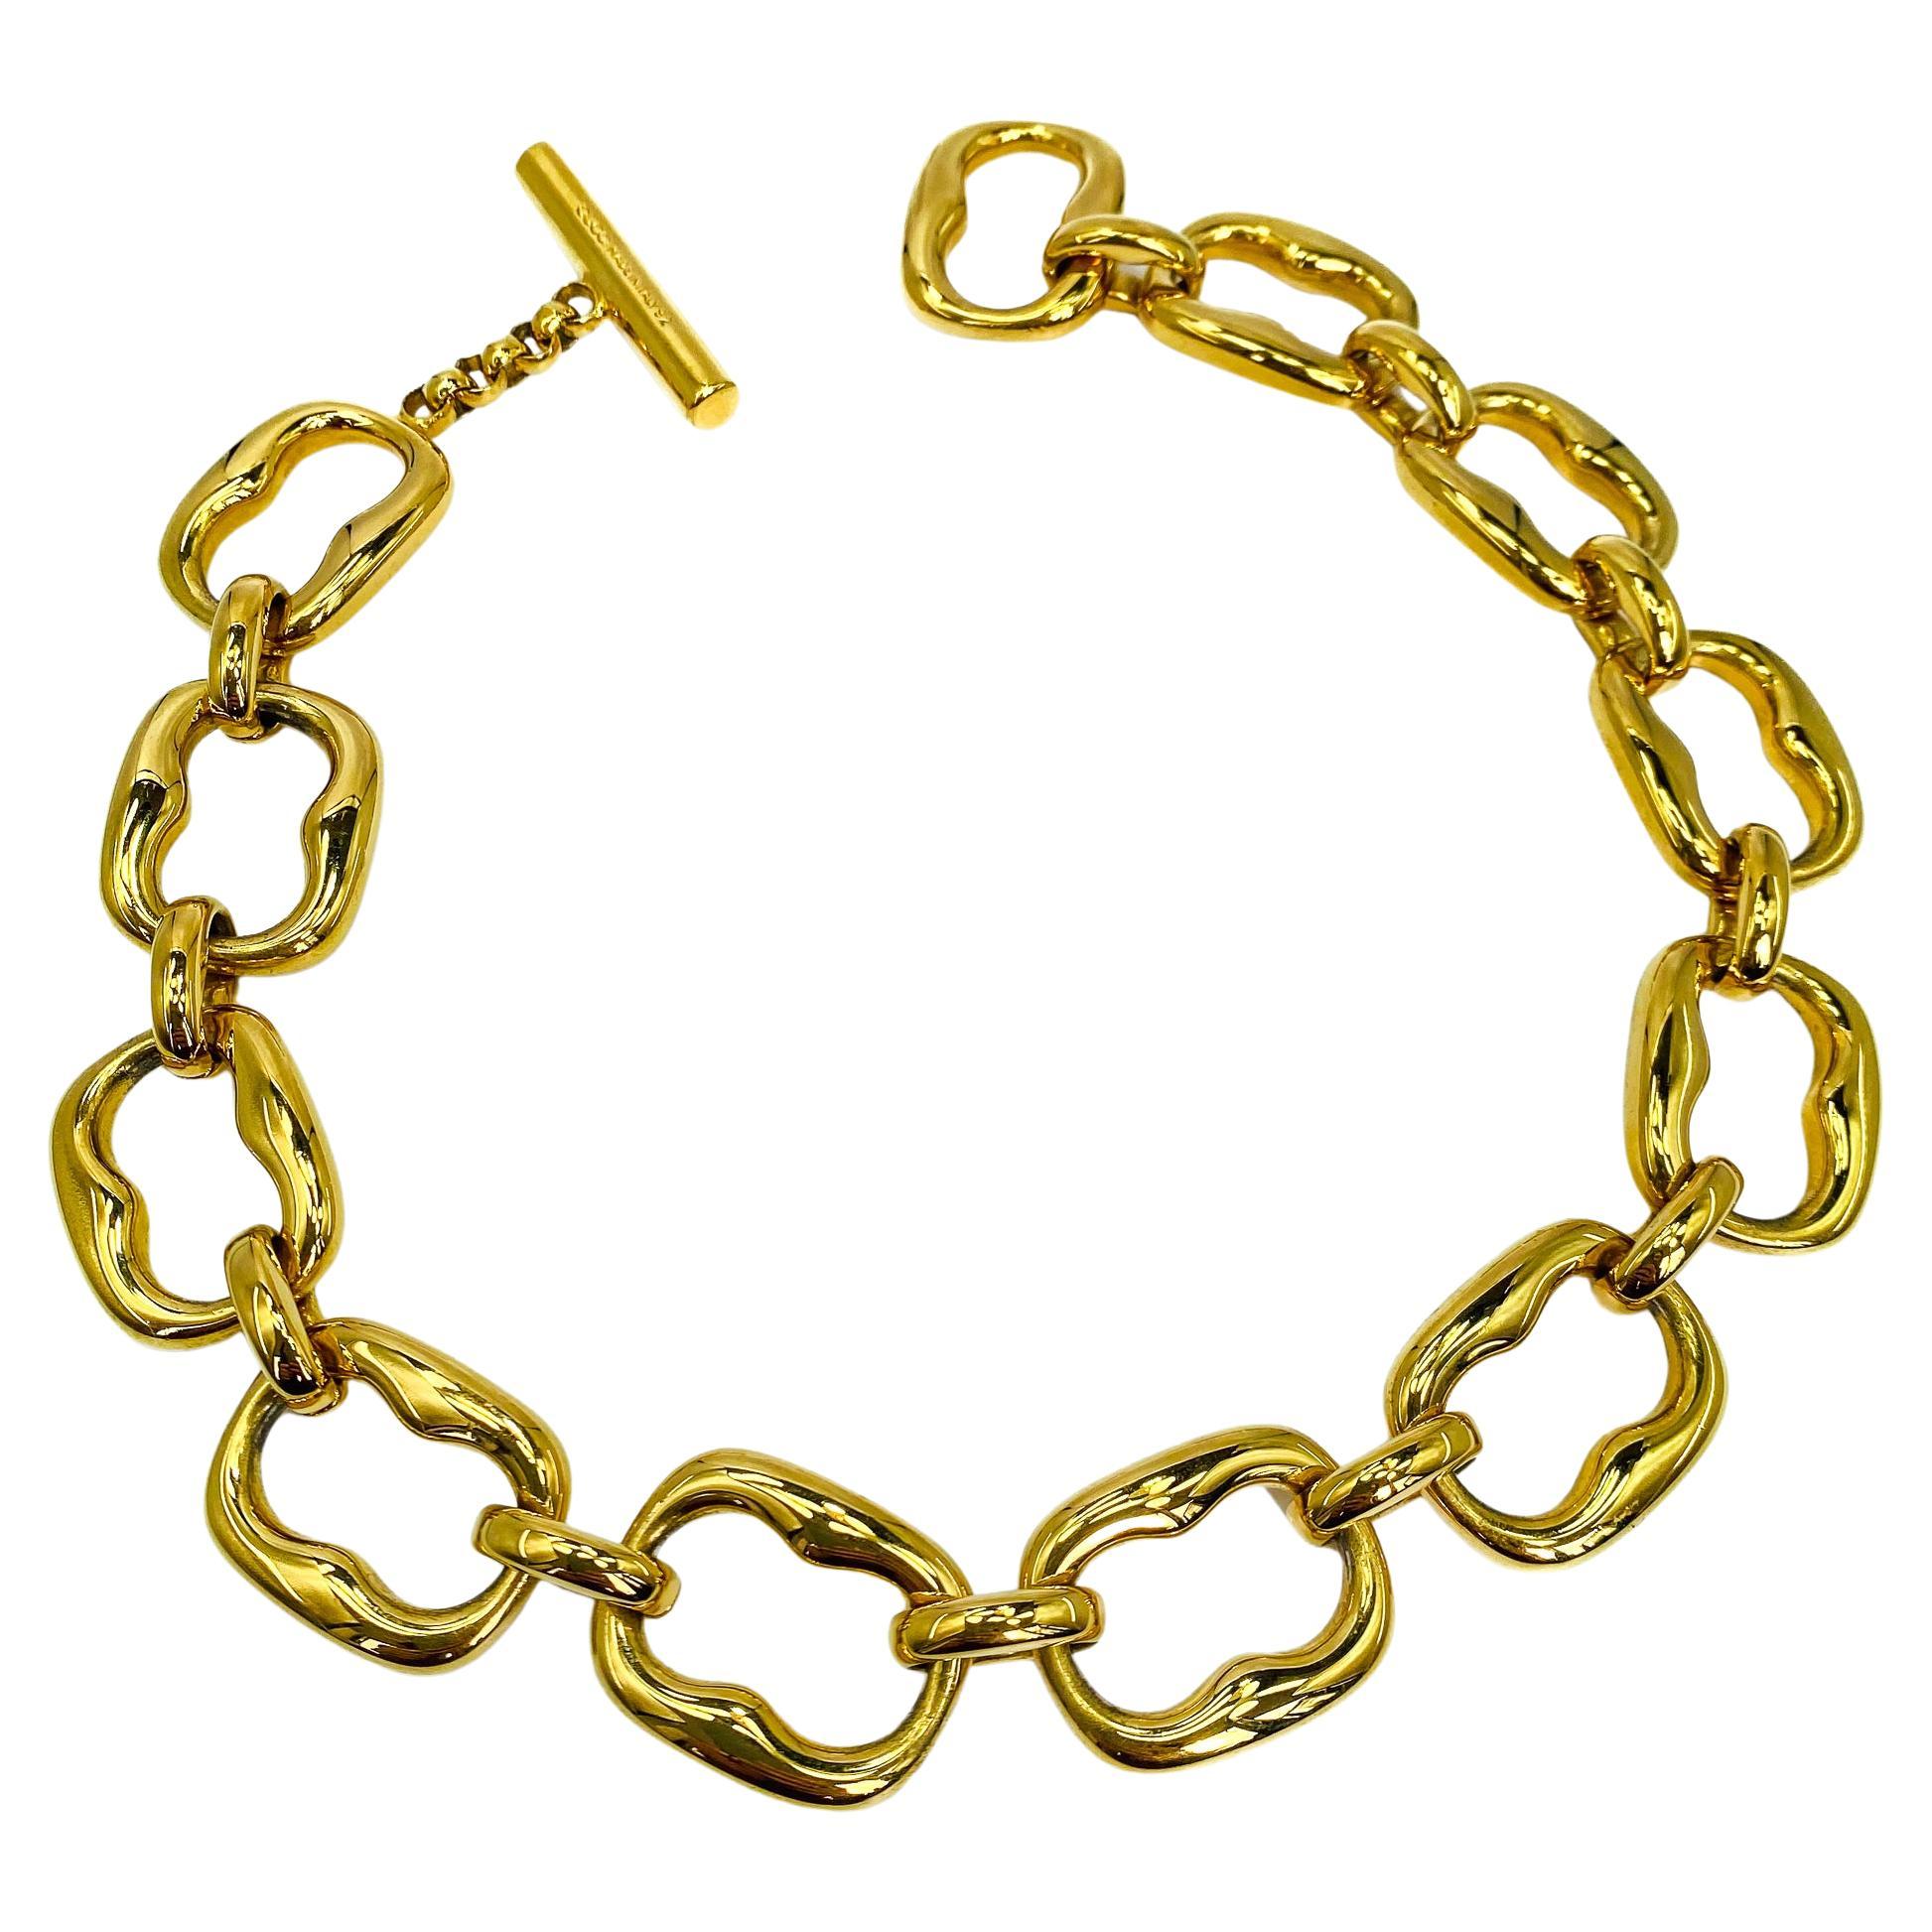 Vintage Gucci Necklace 1990s - 1992 Collection